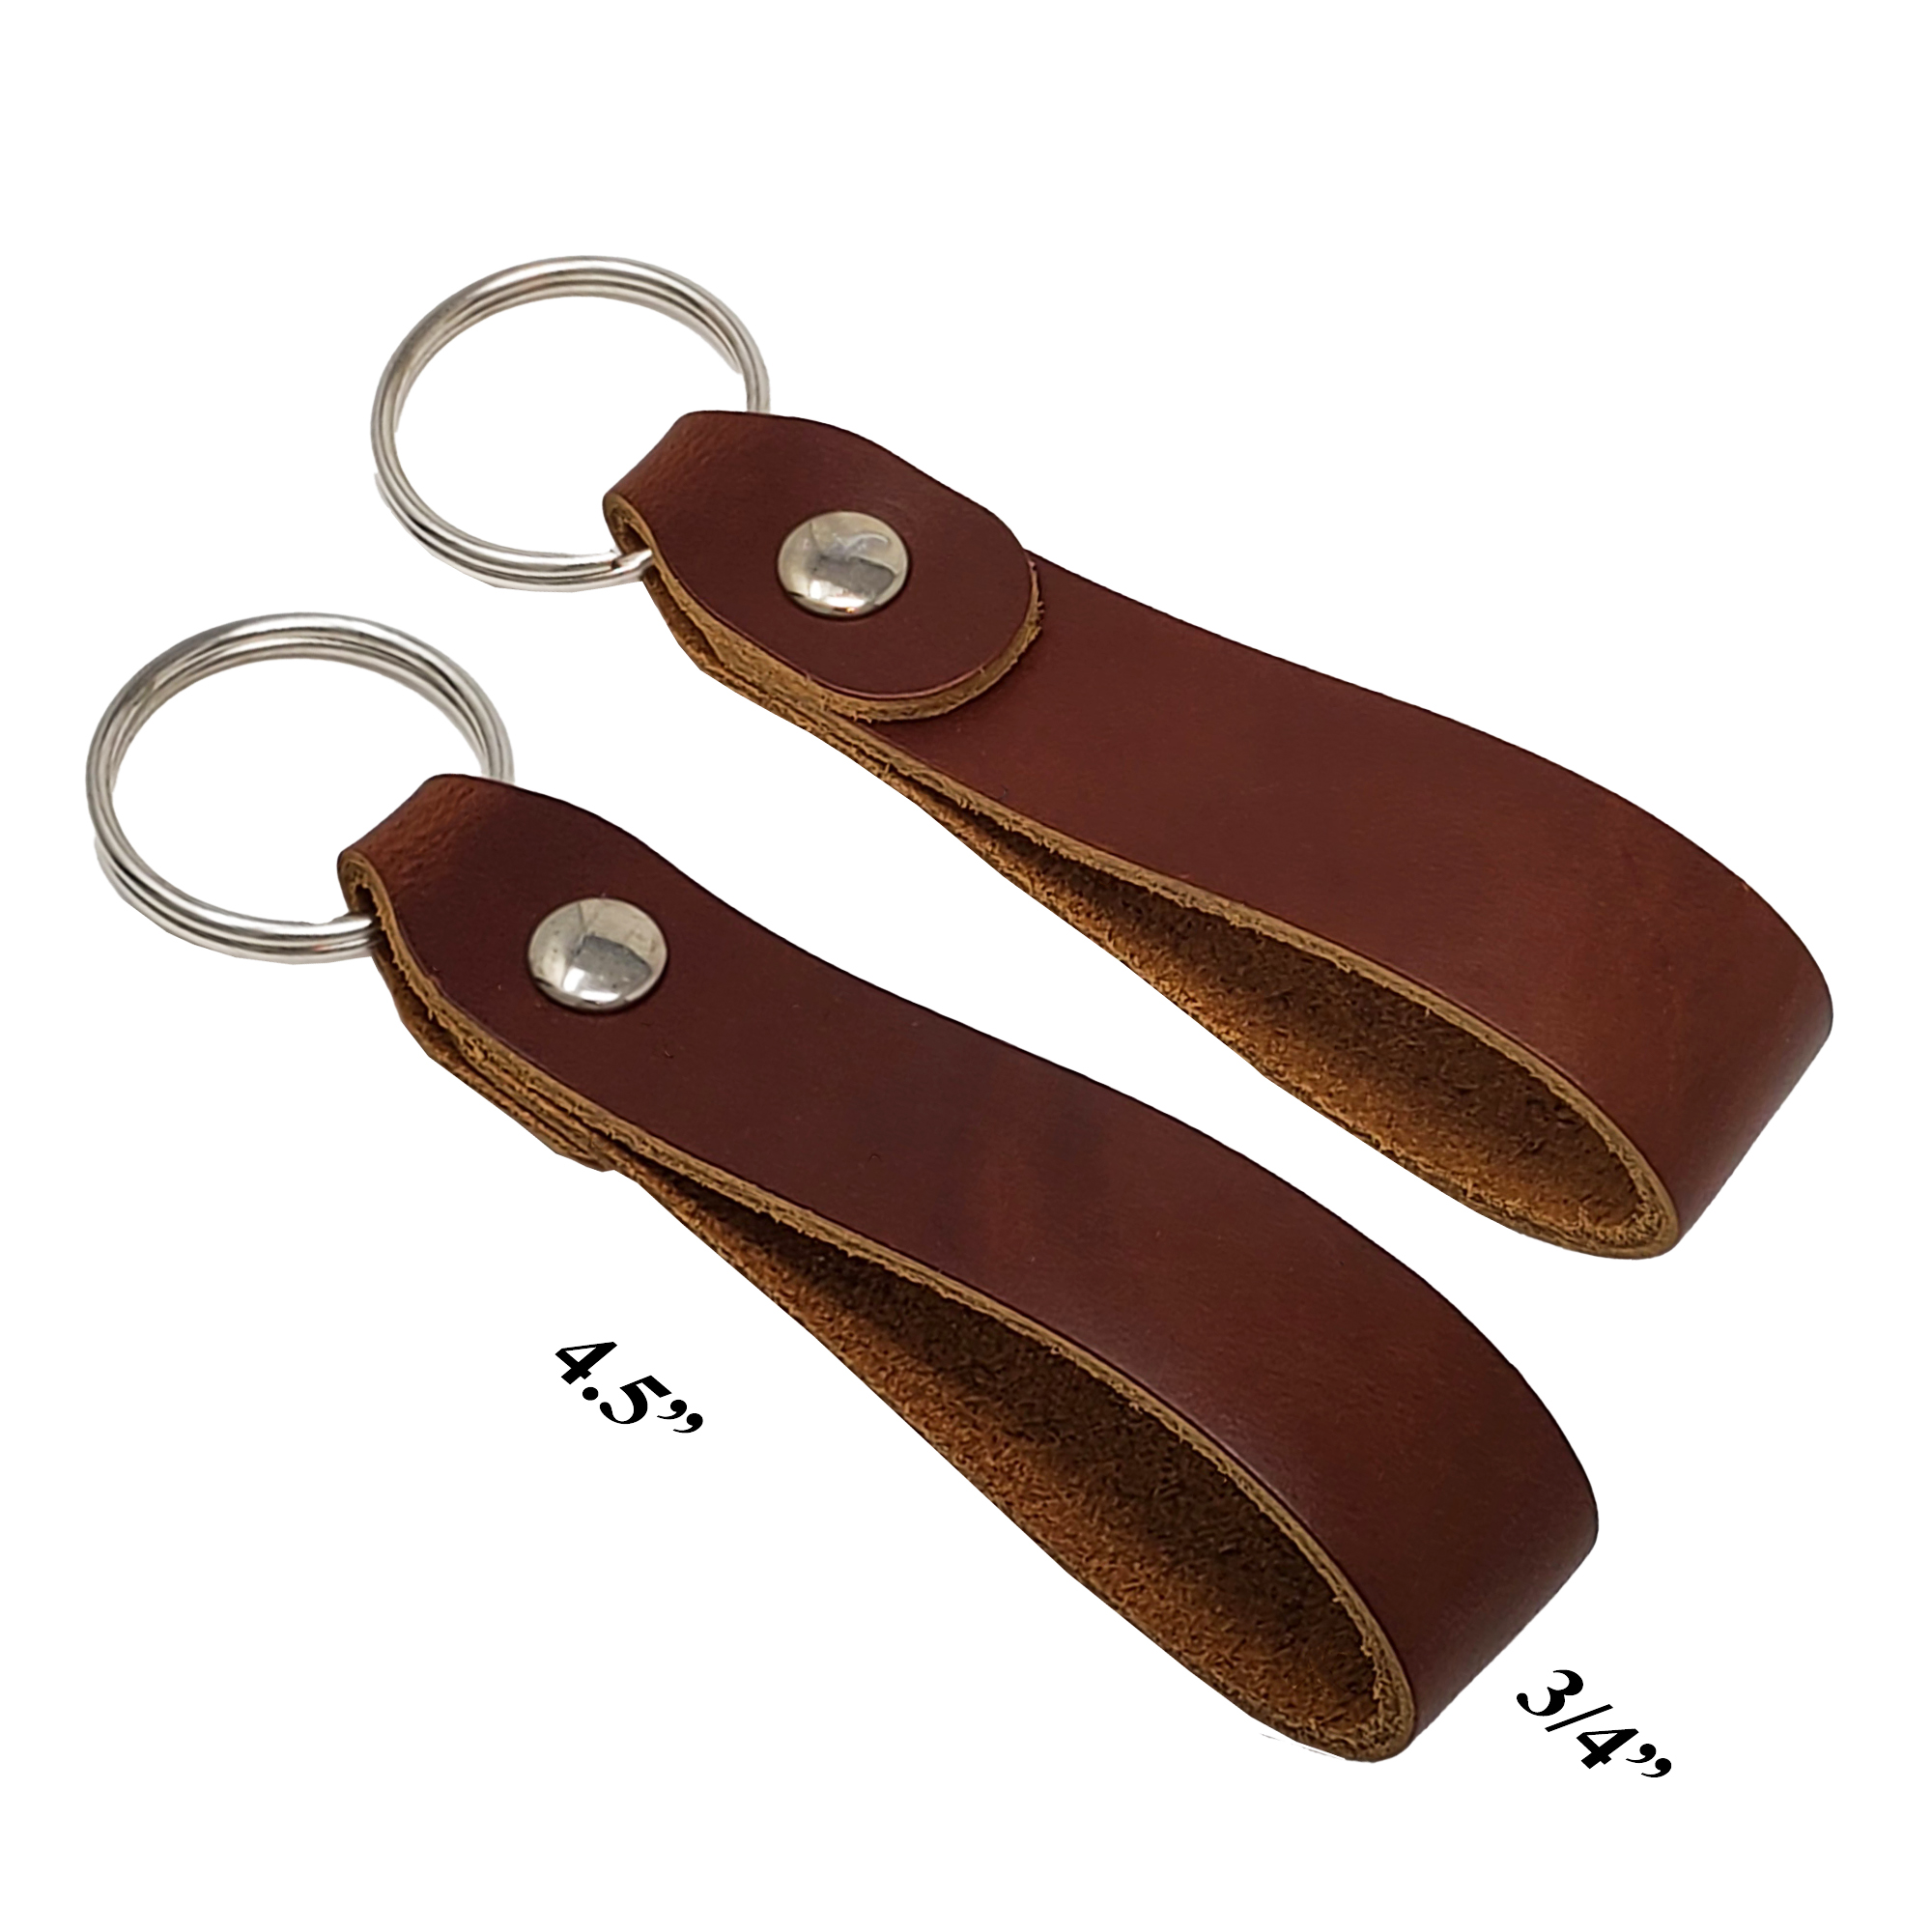 TXZWJZ Leather Keychain Blanks Bulk,4 Pack PU Leather Key Fobs Blanks with Key Rings for Laser Engraving Keychain Making Leather Working DIY Craft Oval